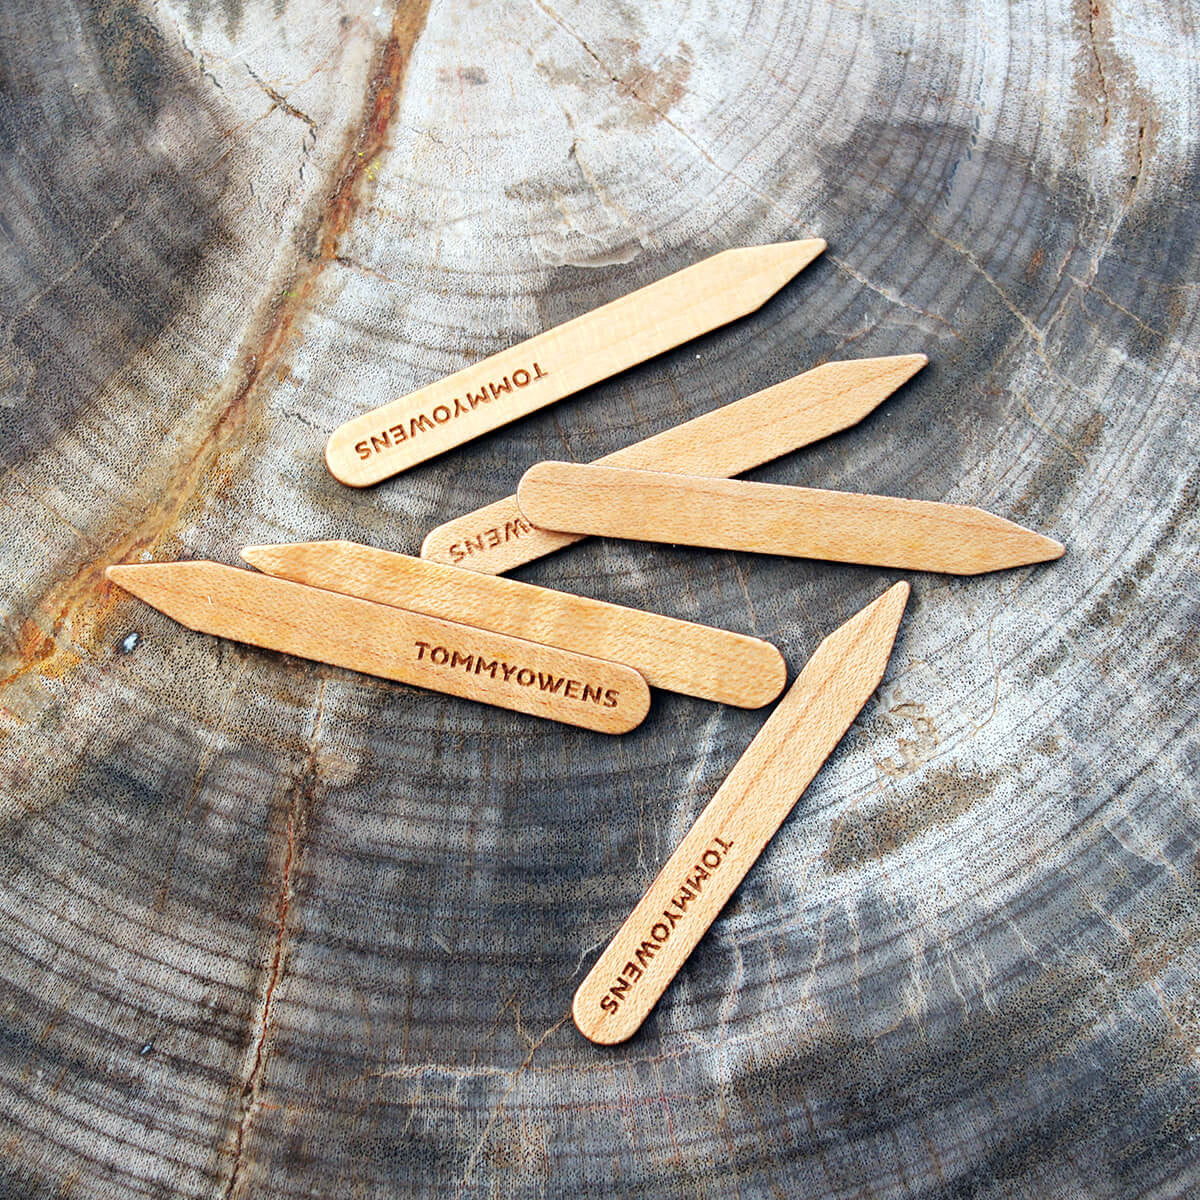 curly maple wood collar stays for dress shirts